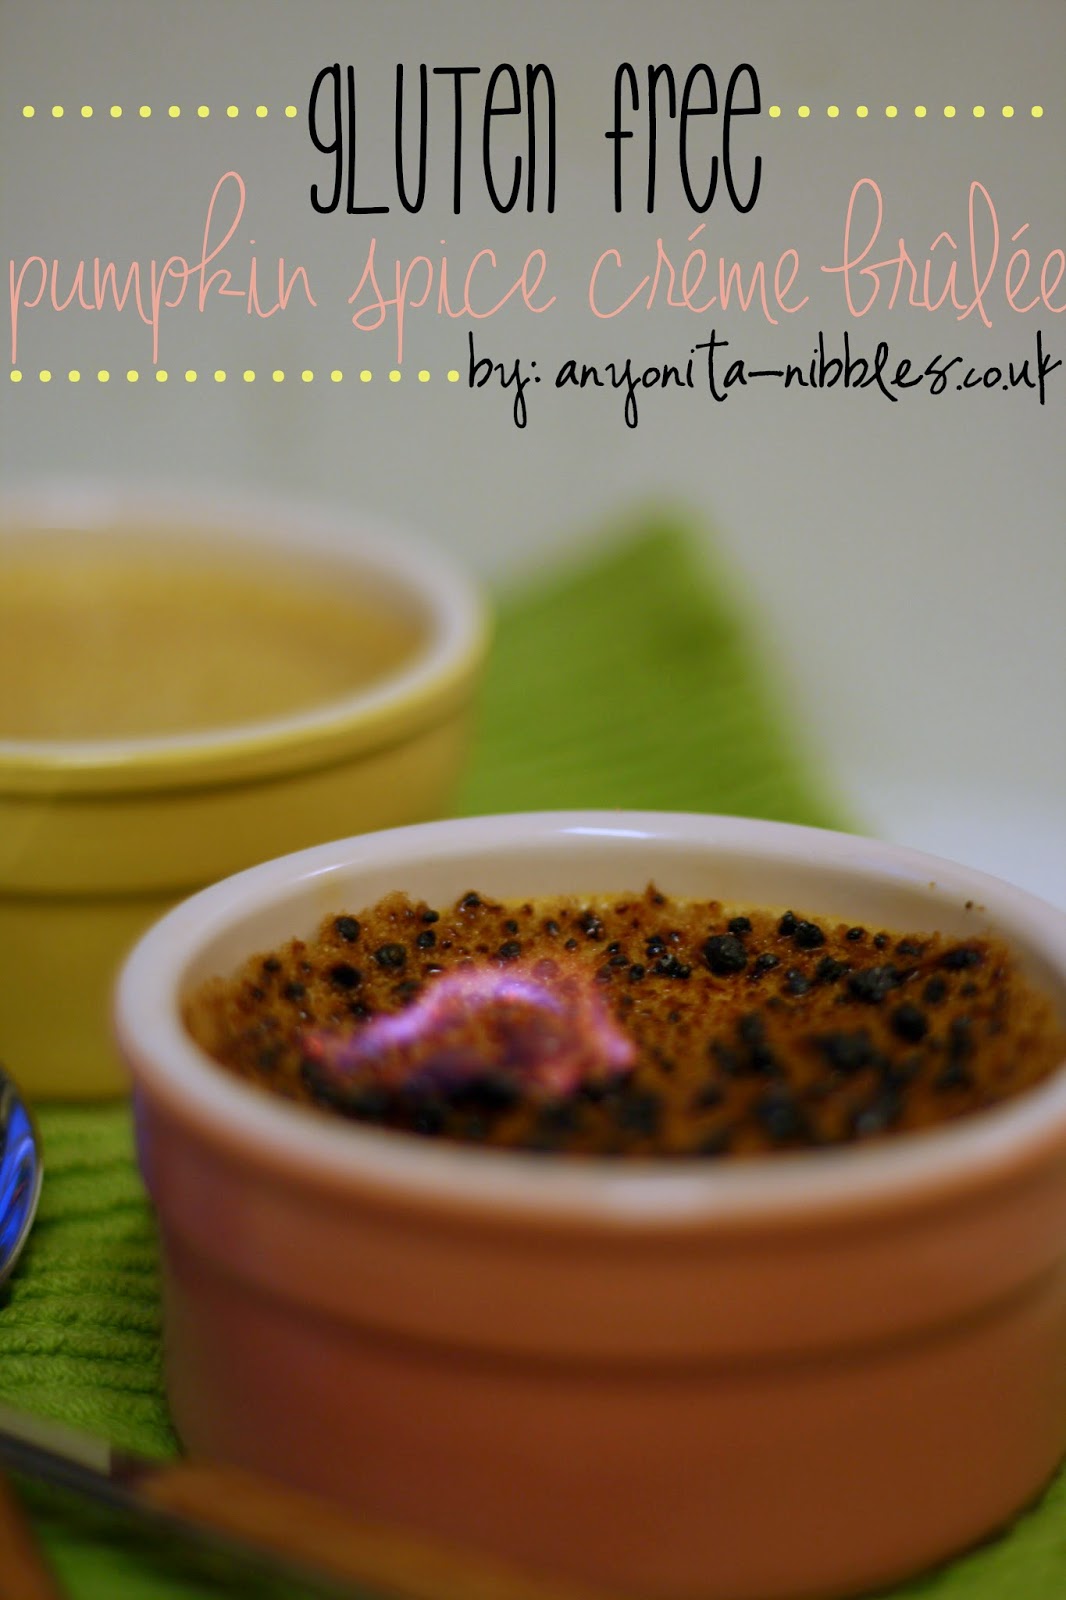 gluten free pumpkin spice creme brulee from anyonita-nibbles.co.uk